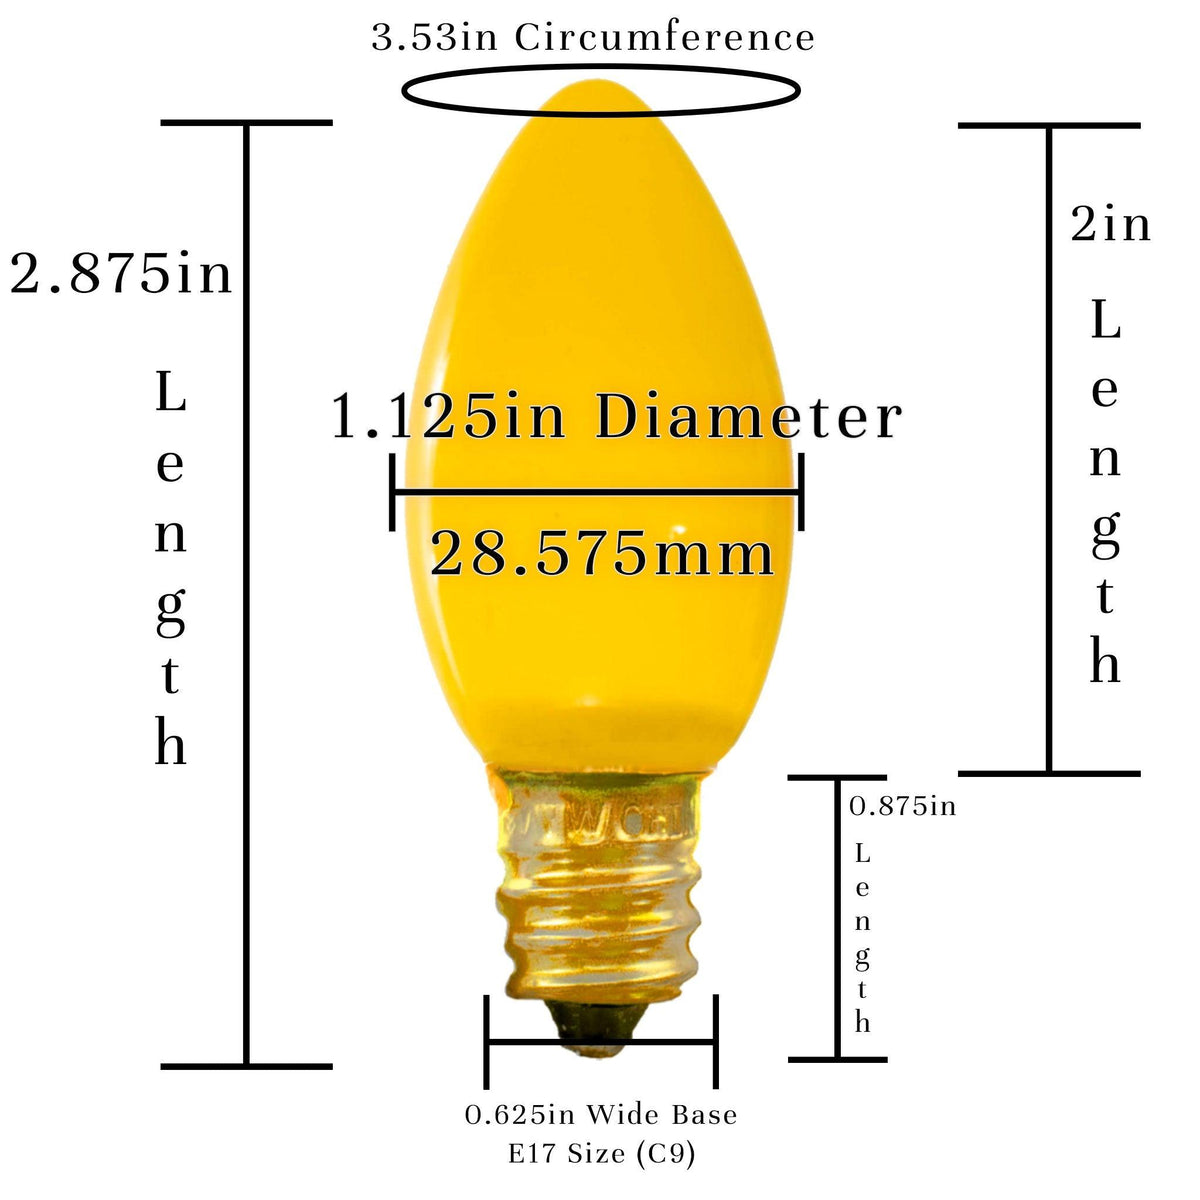 Size of a C9 Candelabra Style Solid Ceramic Multicolor Light Bulb from Lee Display